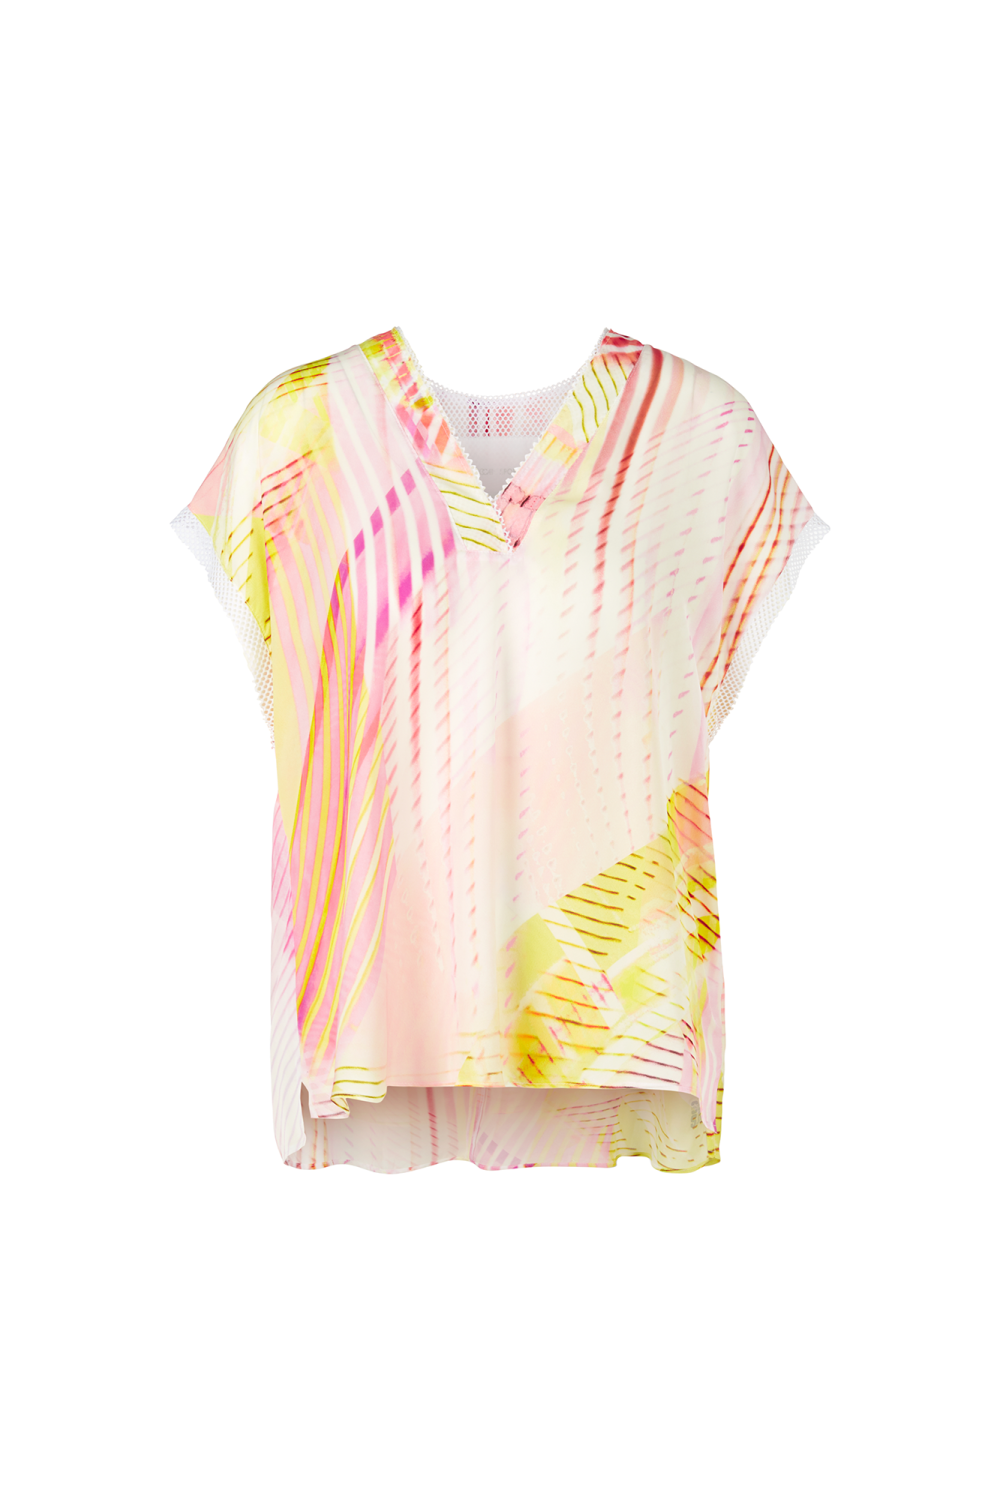 This vibrant blouse from Marc Cain is a must-have this season. Cut from a lightweight viscose fabric with statement mesh details, the asymmetric design includes a plunging V-neck and side slits on the hem to create a relaxed and comfortable fit. Perfect for summer days.